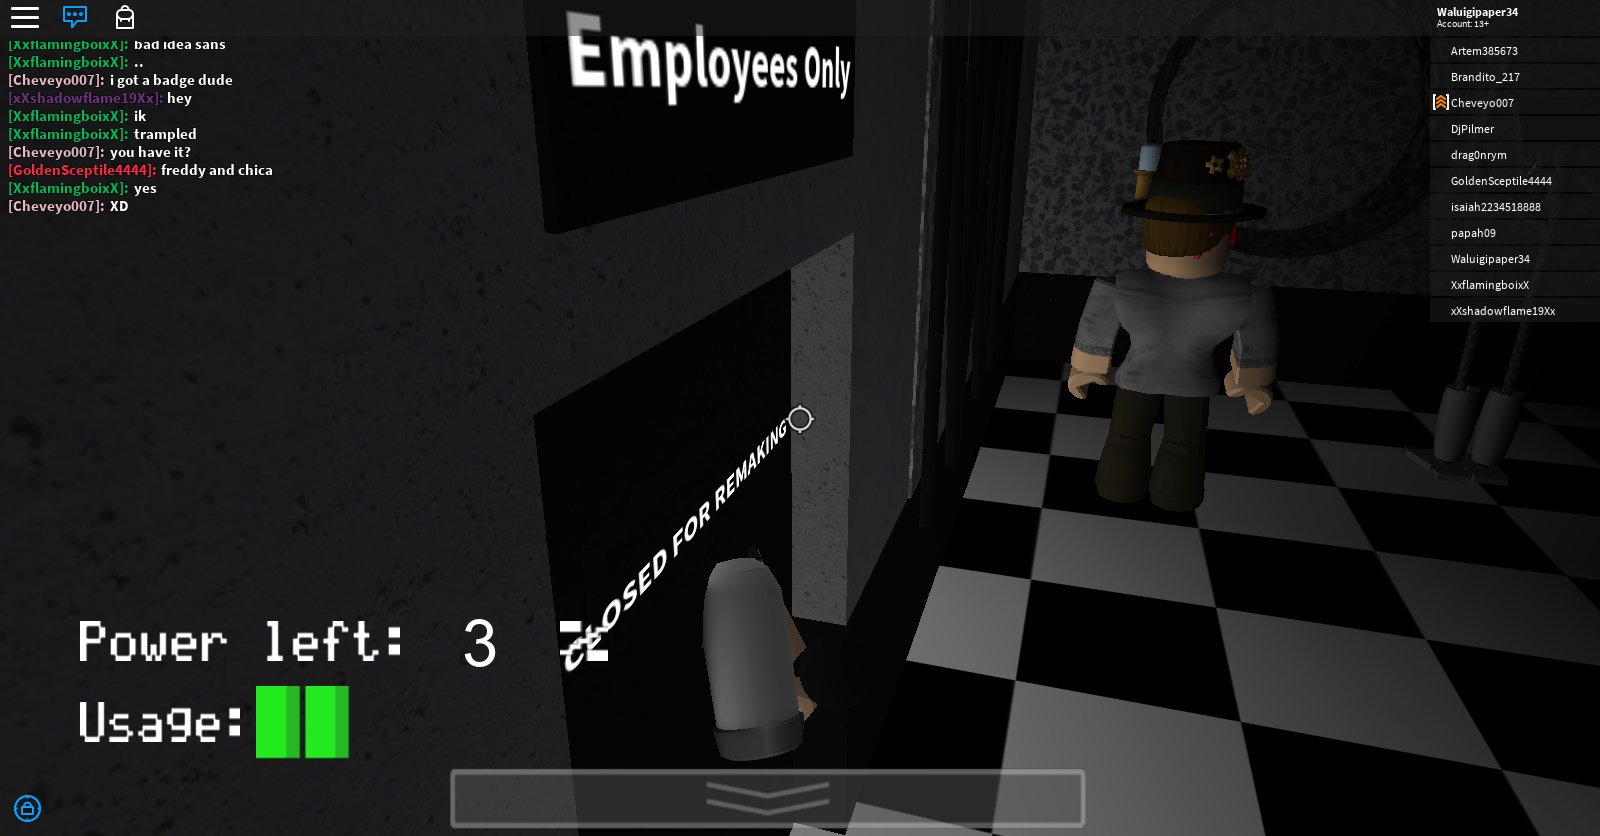 Mike Emil On Twitter This Bad News This Brutezbloxikin In Backstage This Brutez Clone - brutez roblox games